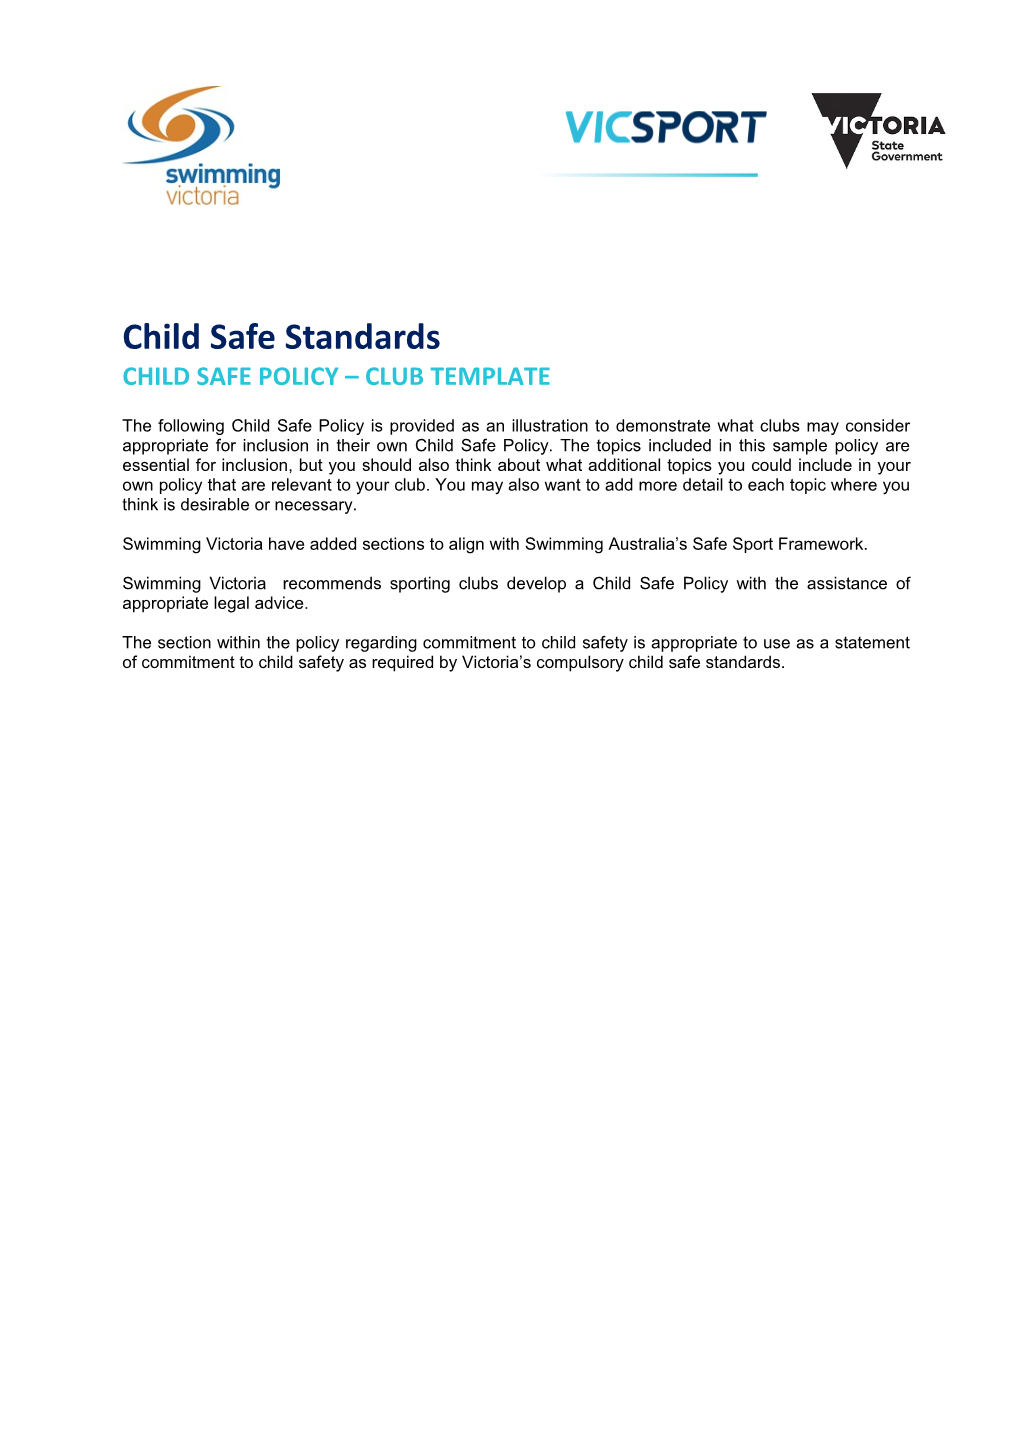 Child Safe Policy Club Template